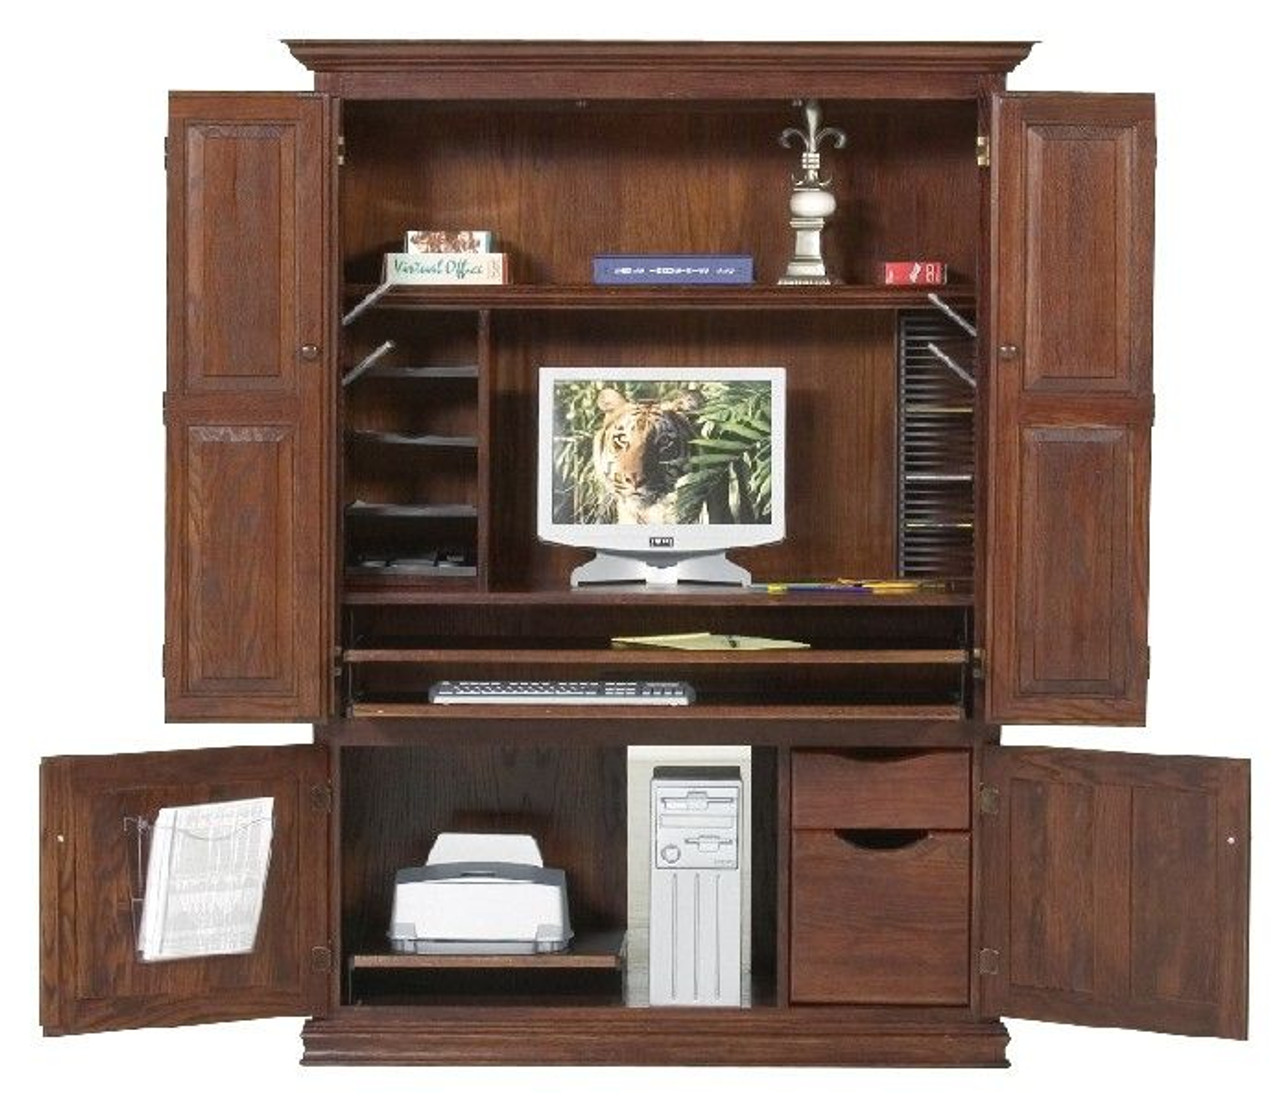 Eagle 53 x 73" Computer Armoire Grandview Classic Oak Deluxe Home Office Executive Workstation with 2 Tall Bi-Fold and 2 Small Raised Panel Wood Doors, CPU Storage, Printer Pull-Outs and Available in All Stain Finishes, Part # E-16453